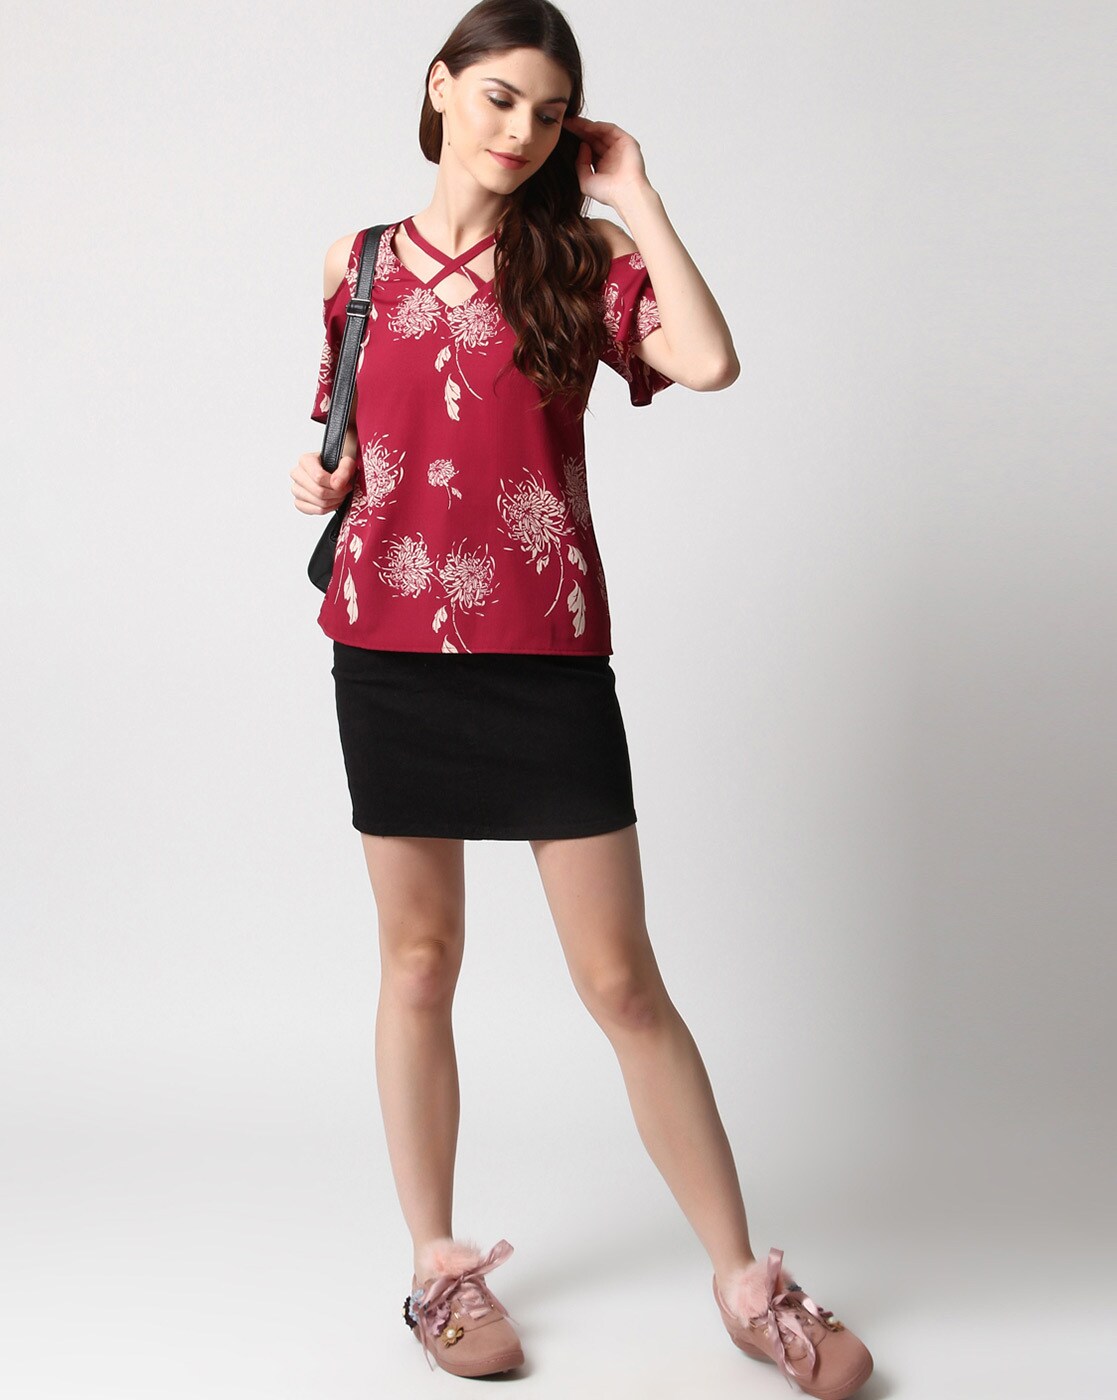 Buy RARE Maroon Floral Top With Cuffed Sleeves - Tops for Women 12364798